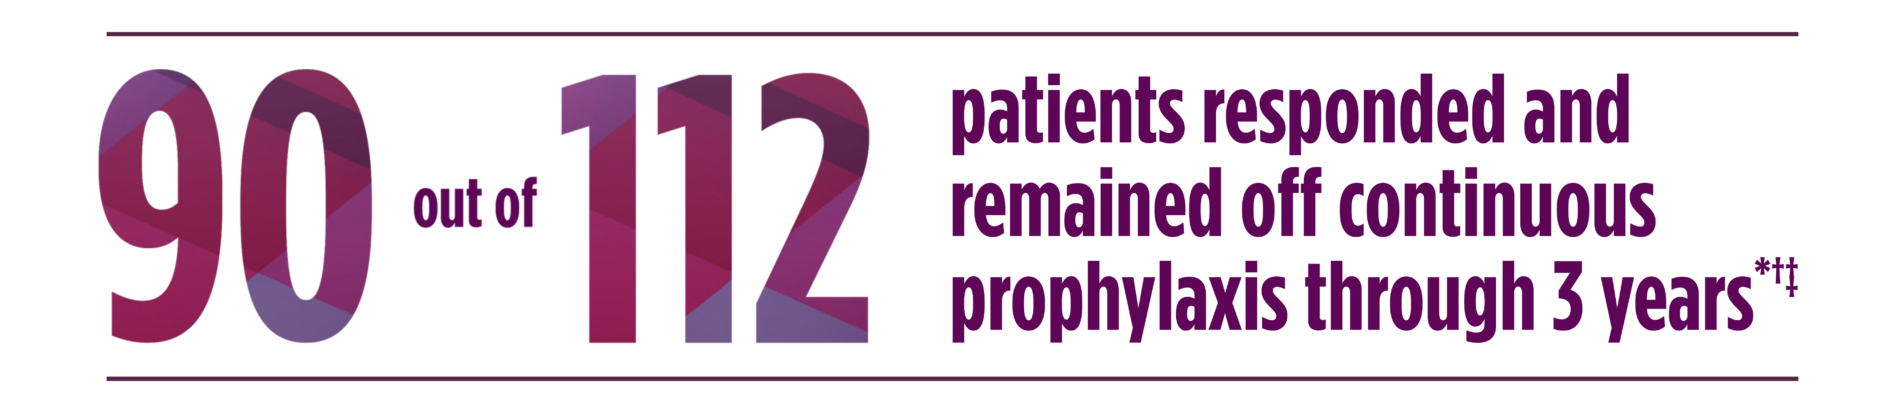 90 out of 112 patients remained off continuous prophylaxis through 3 years (asterisk, dagger, and double dagger footnote symbols)